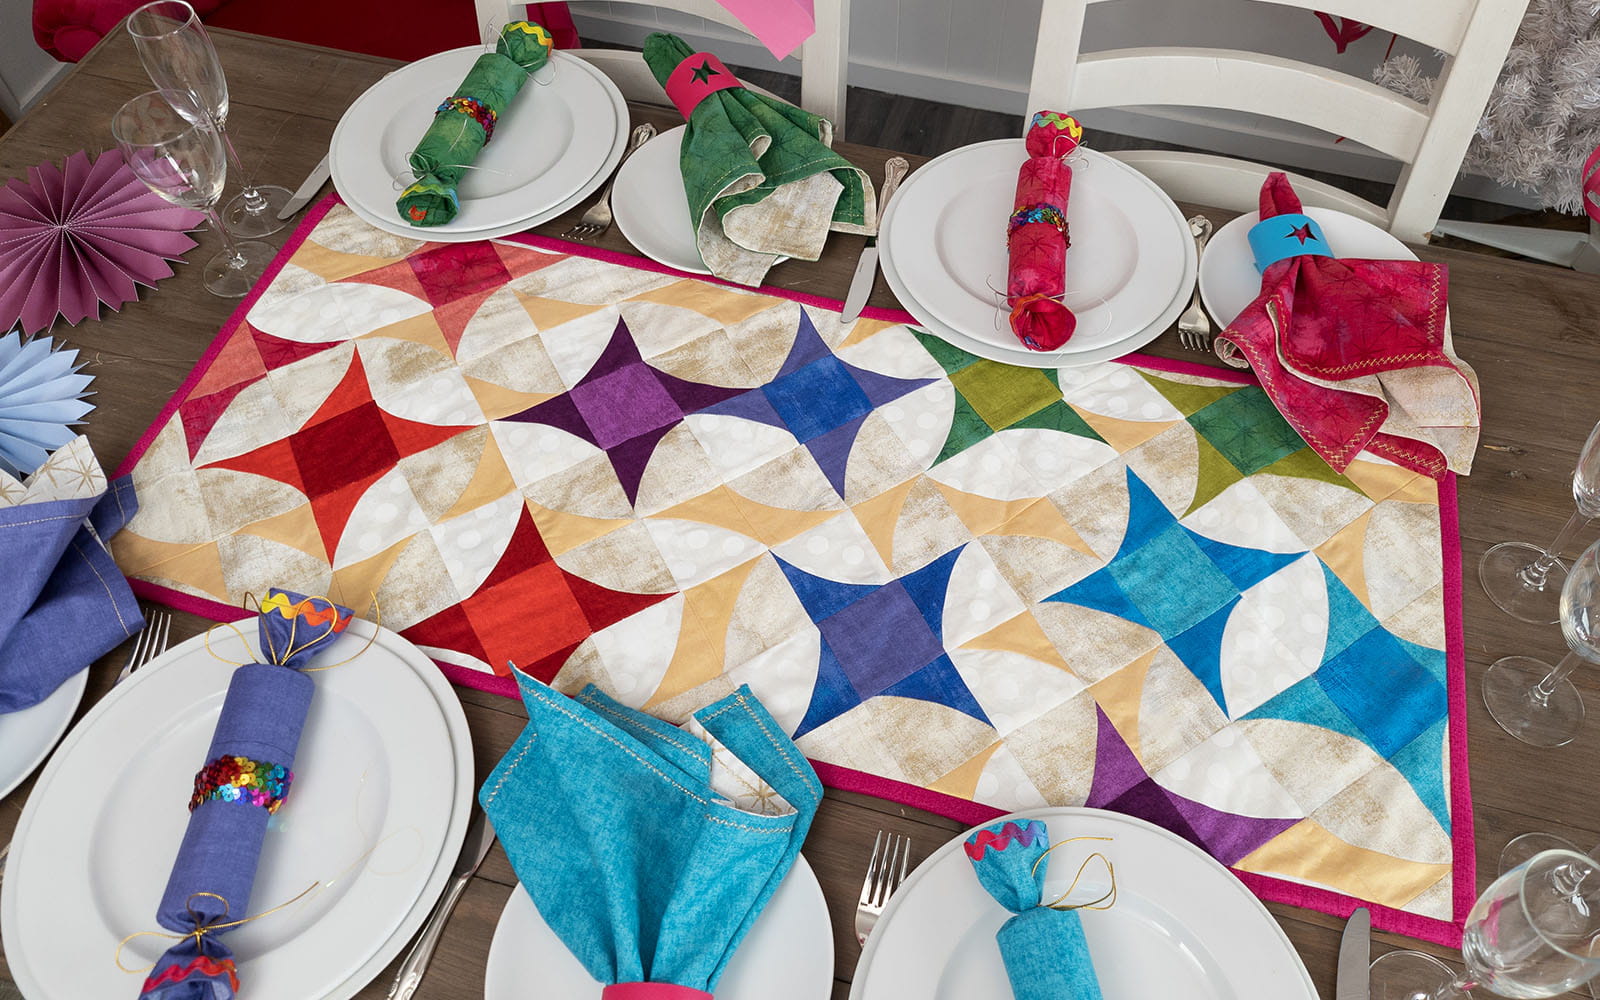 Colourful star quilt on festive set table